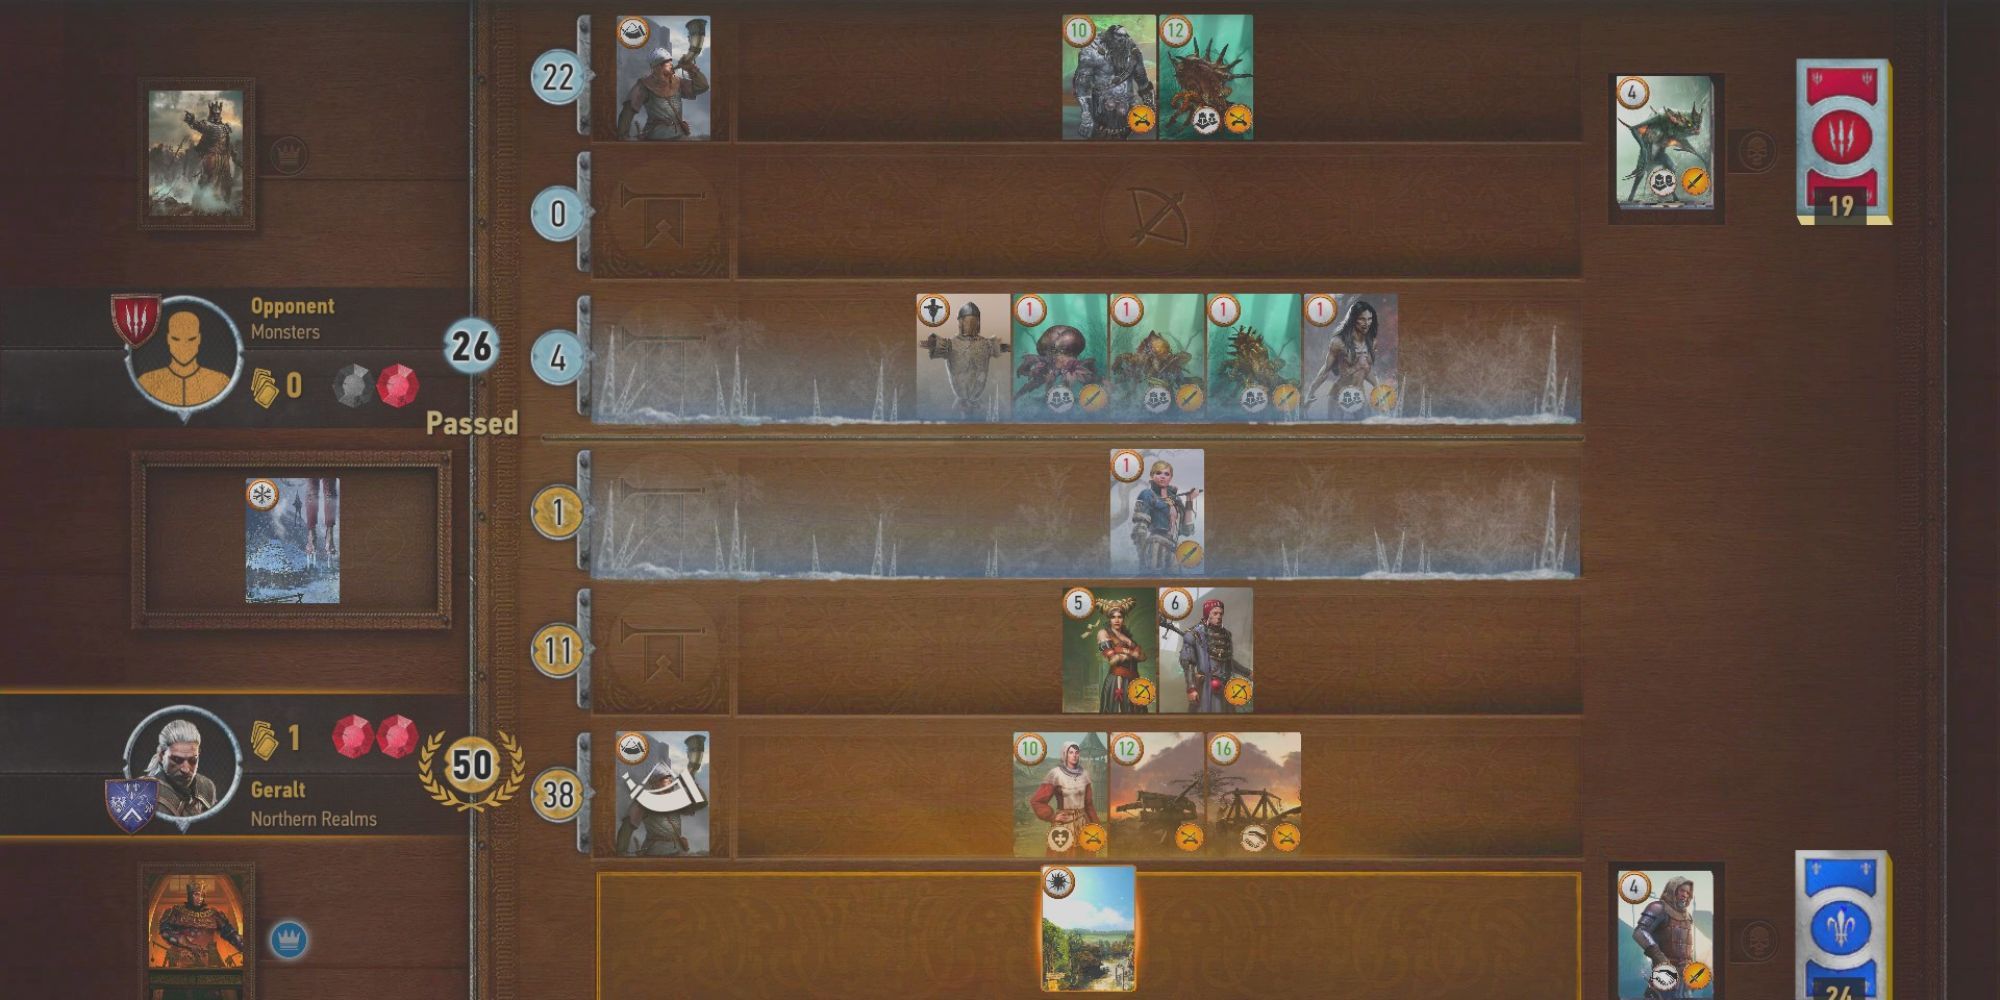 Gwent against the monster deck at the masquerade ball